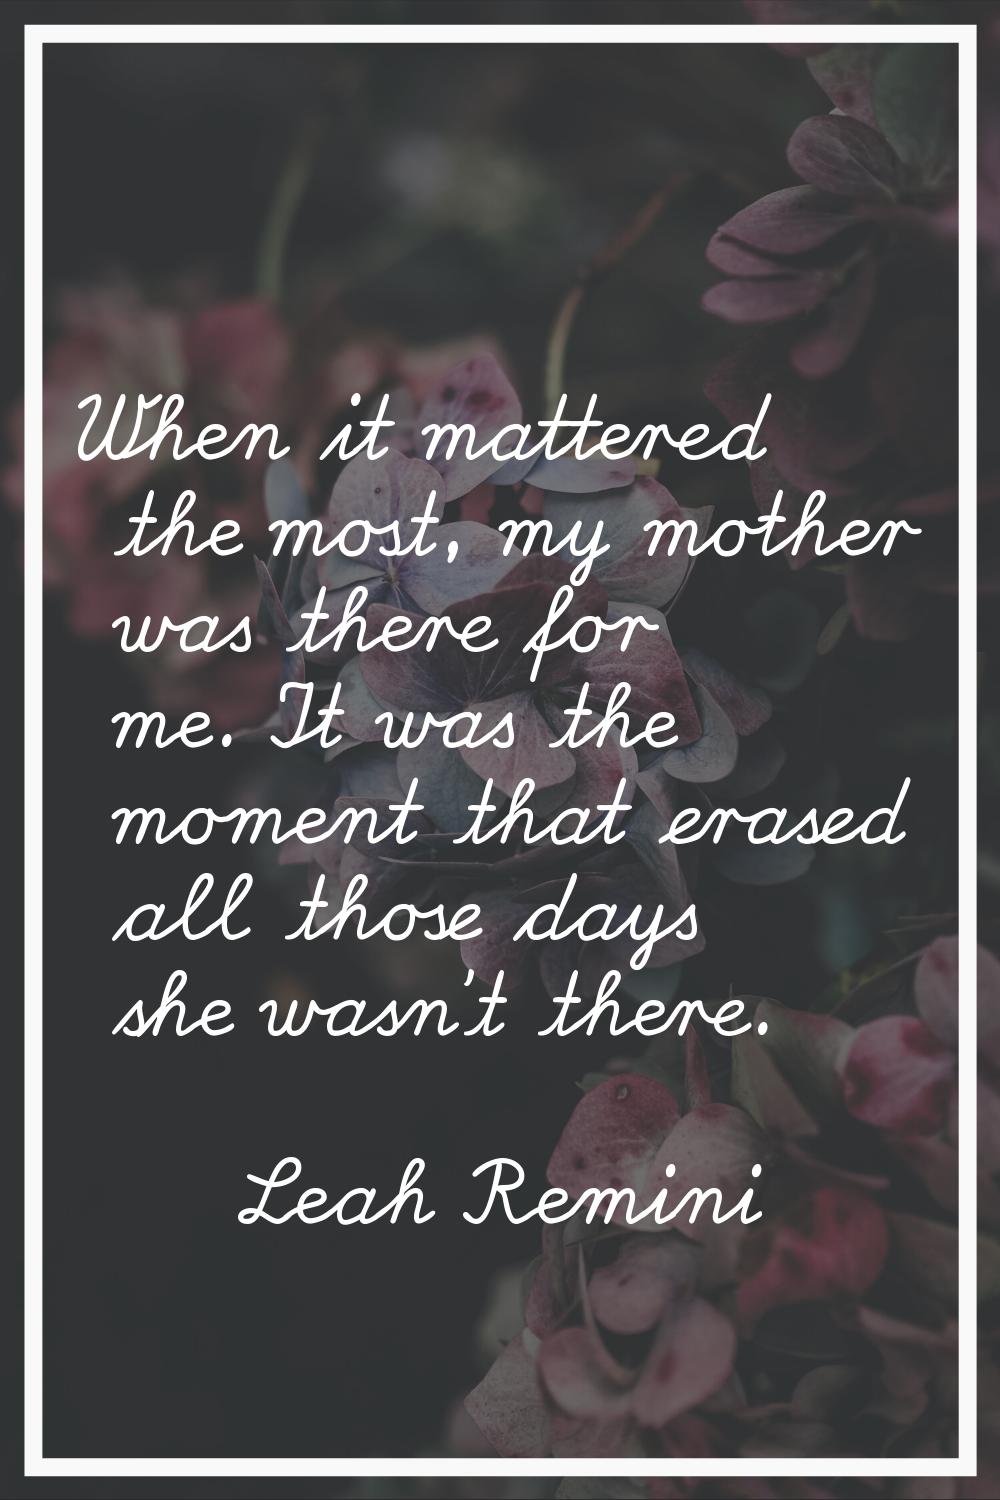 When it mattered the most, my mother was there for me. It was the moment that erased all those days